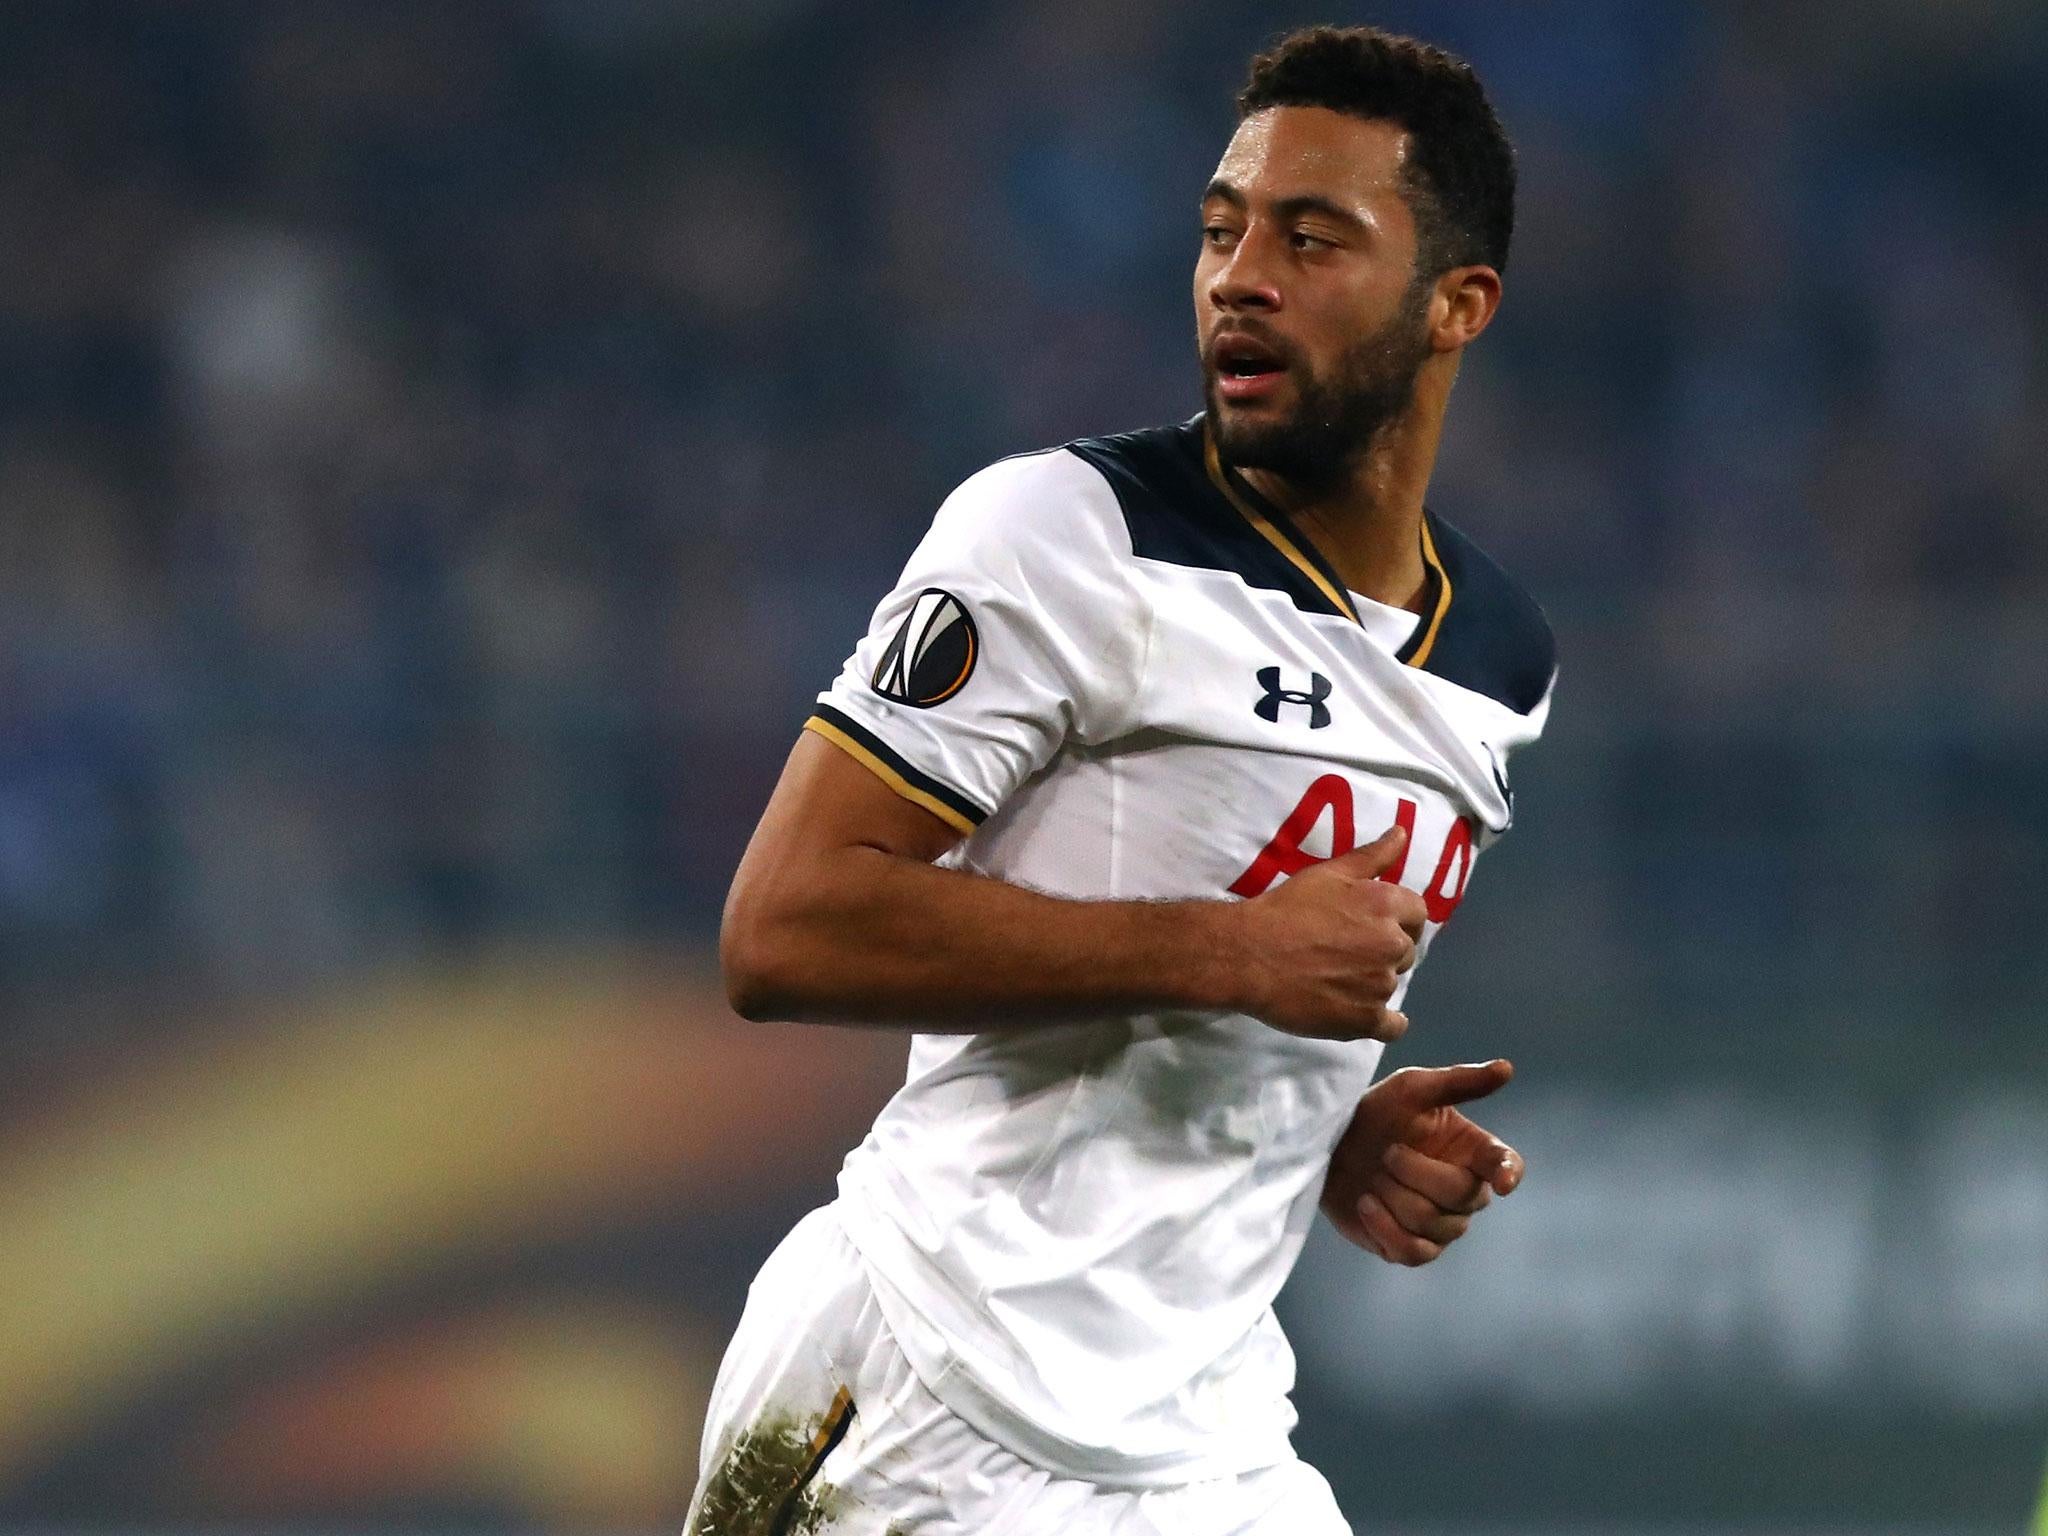 Mousa Dembele believes Tottenham were not good enough to warrant victory in their first leg against Gent